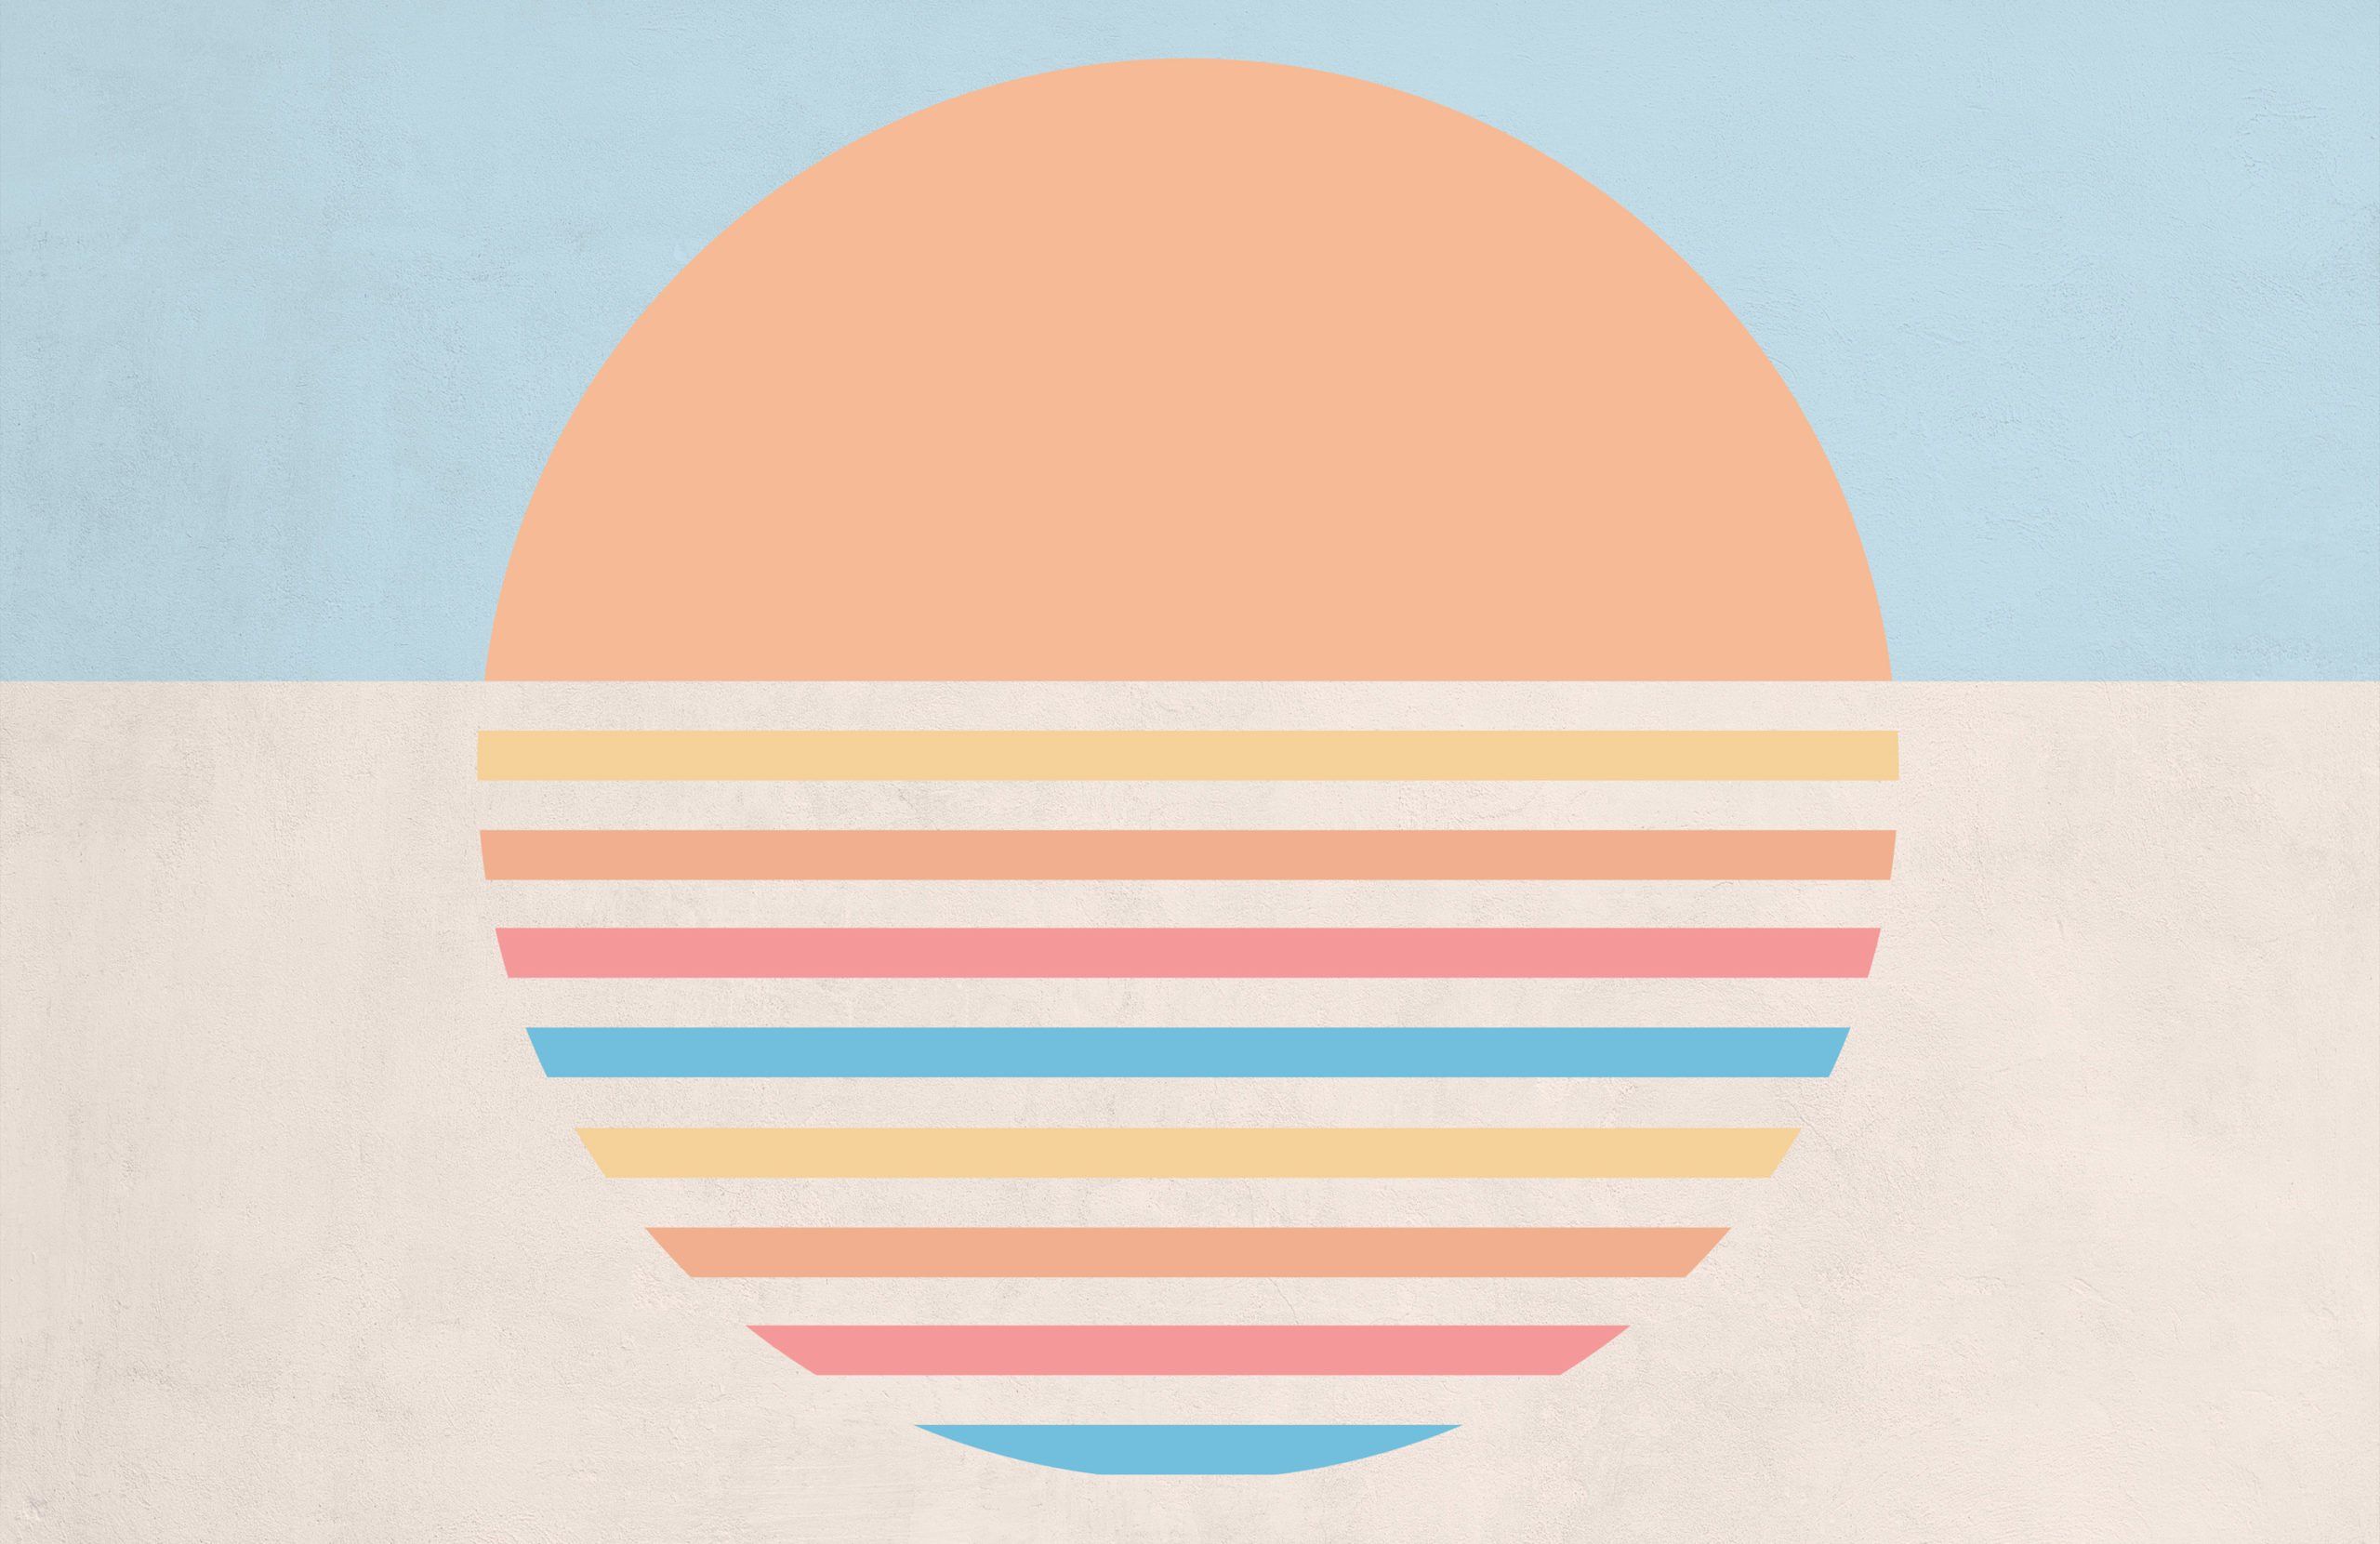 A digital illustration of a sunset with a pastel gradient - 70s